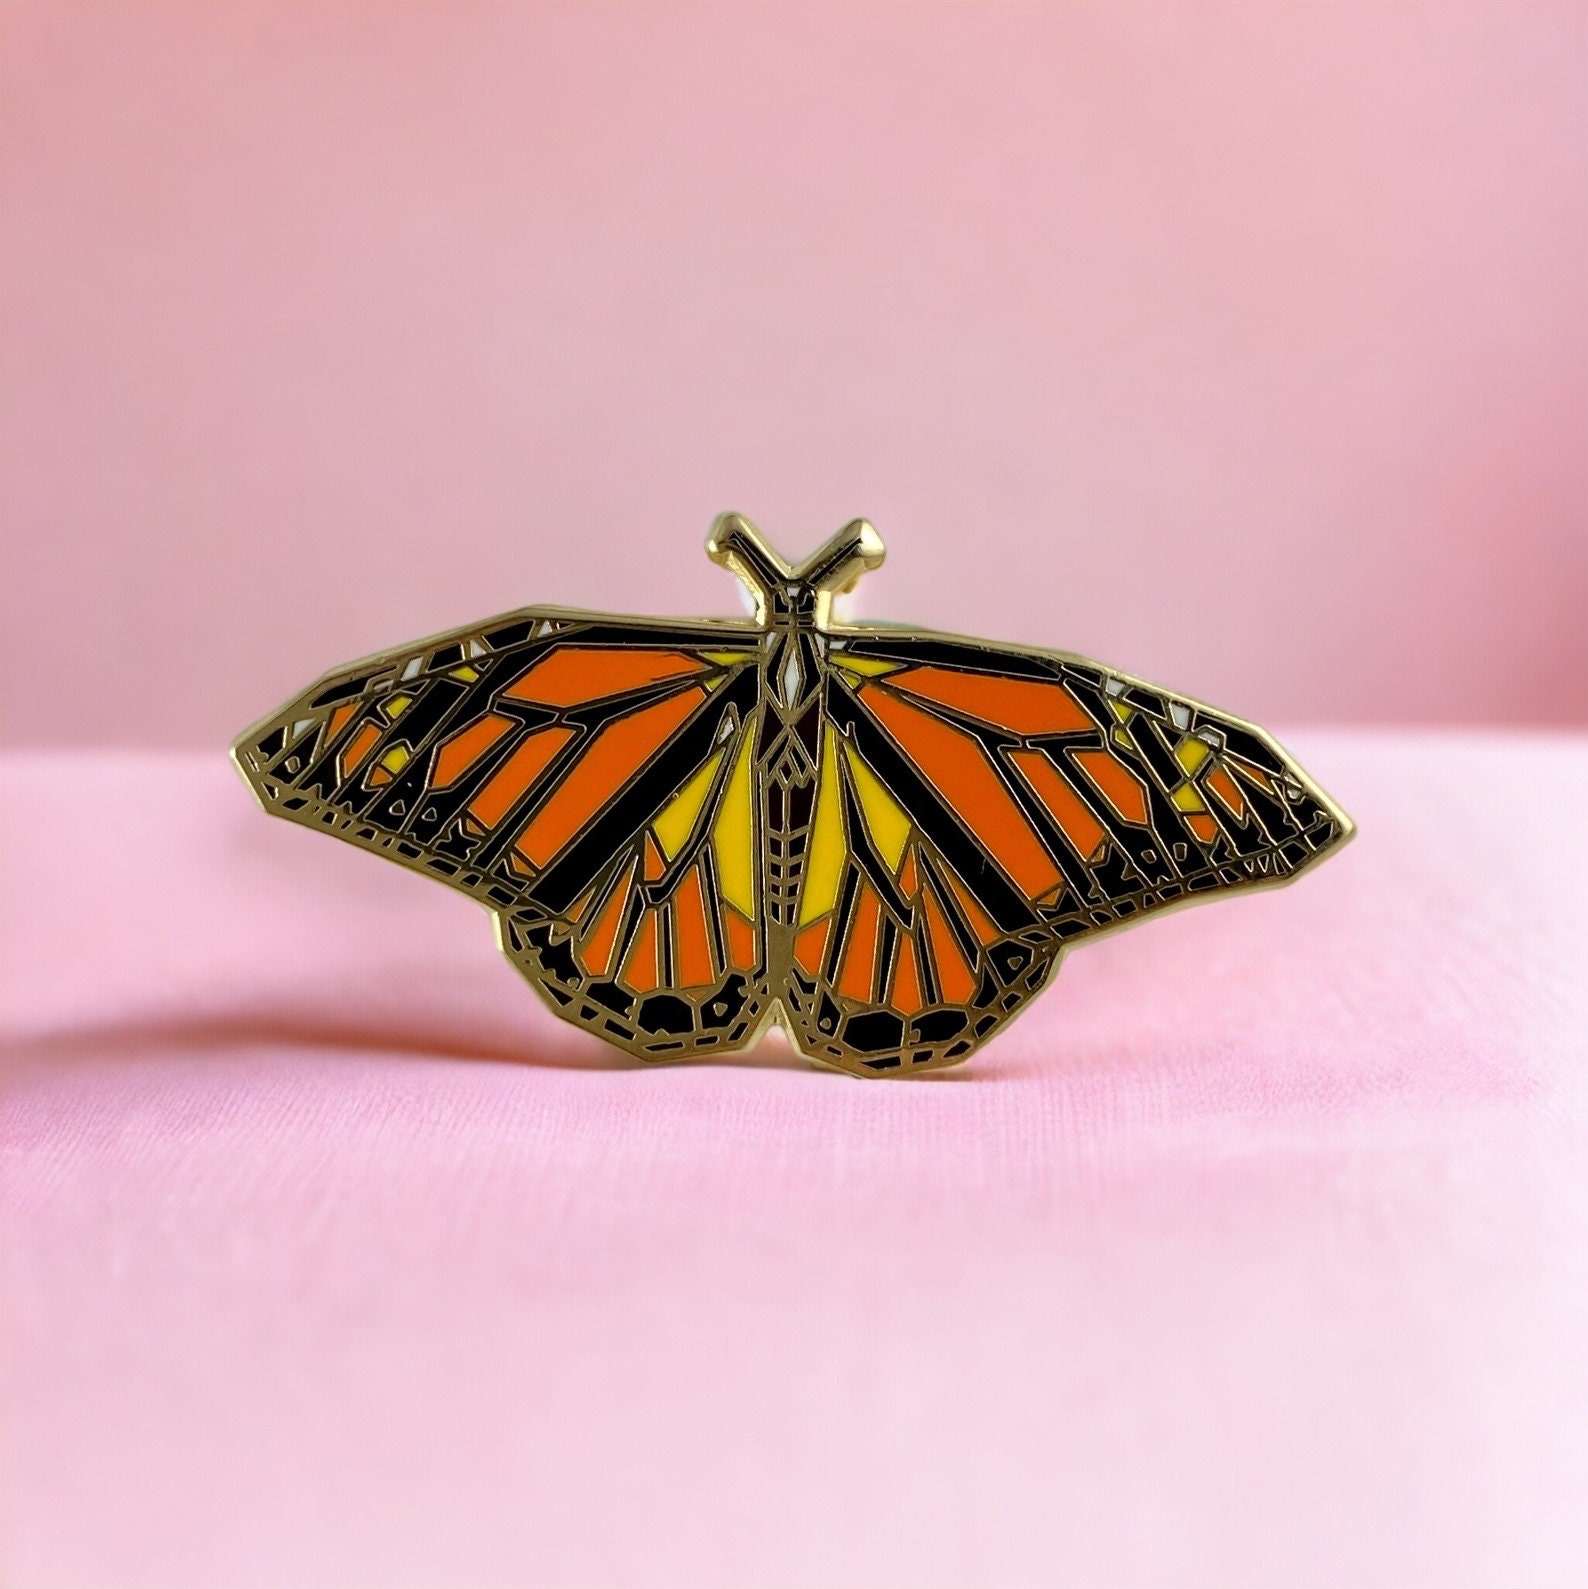 Constantly Evolving Monarch Butterfly Pins